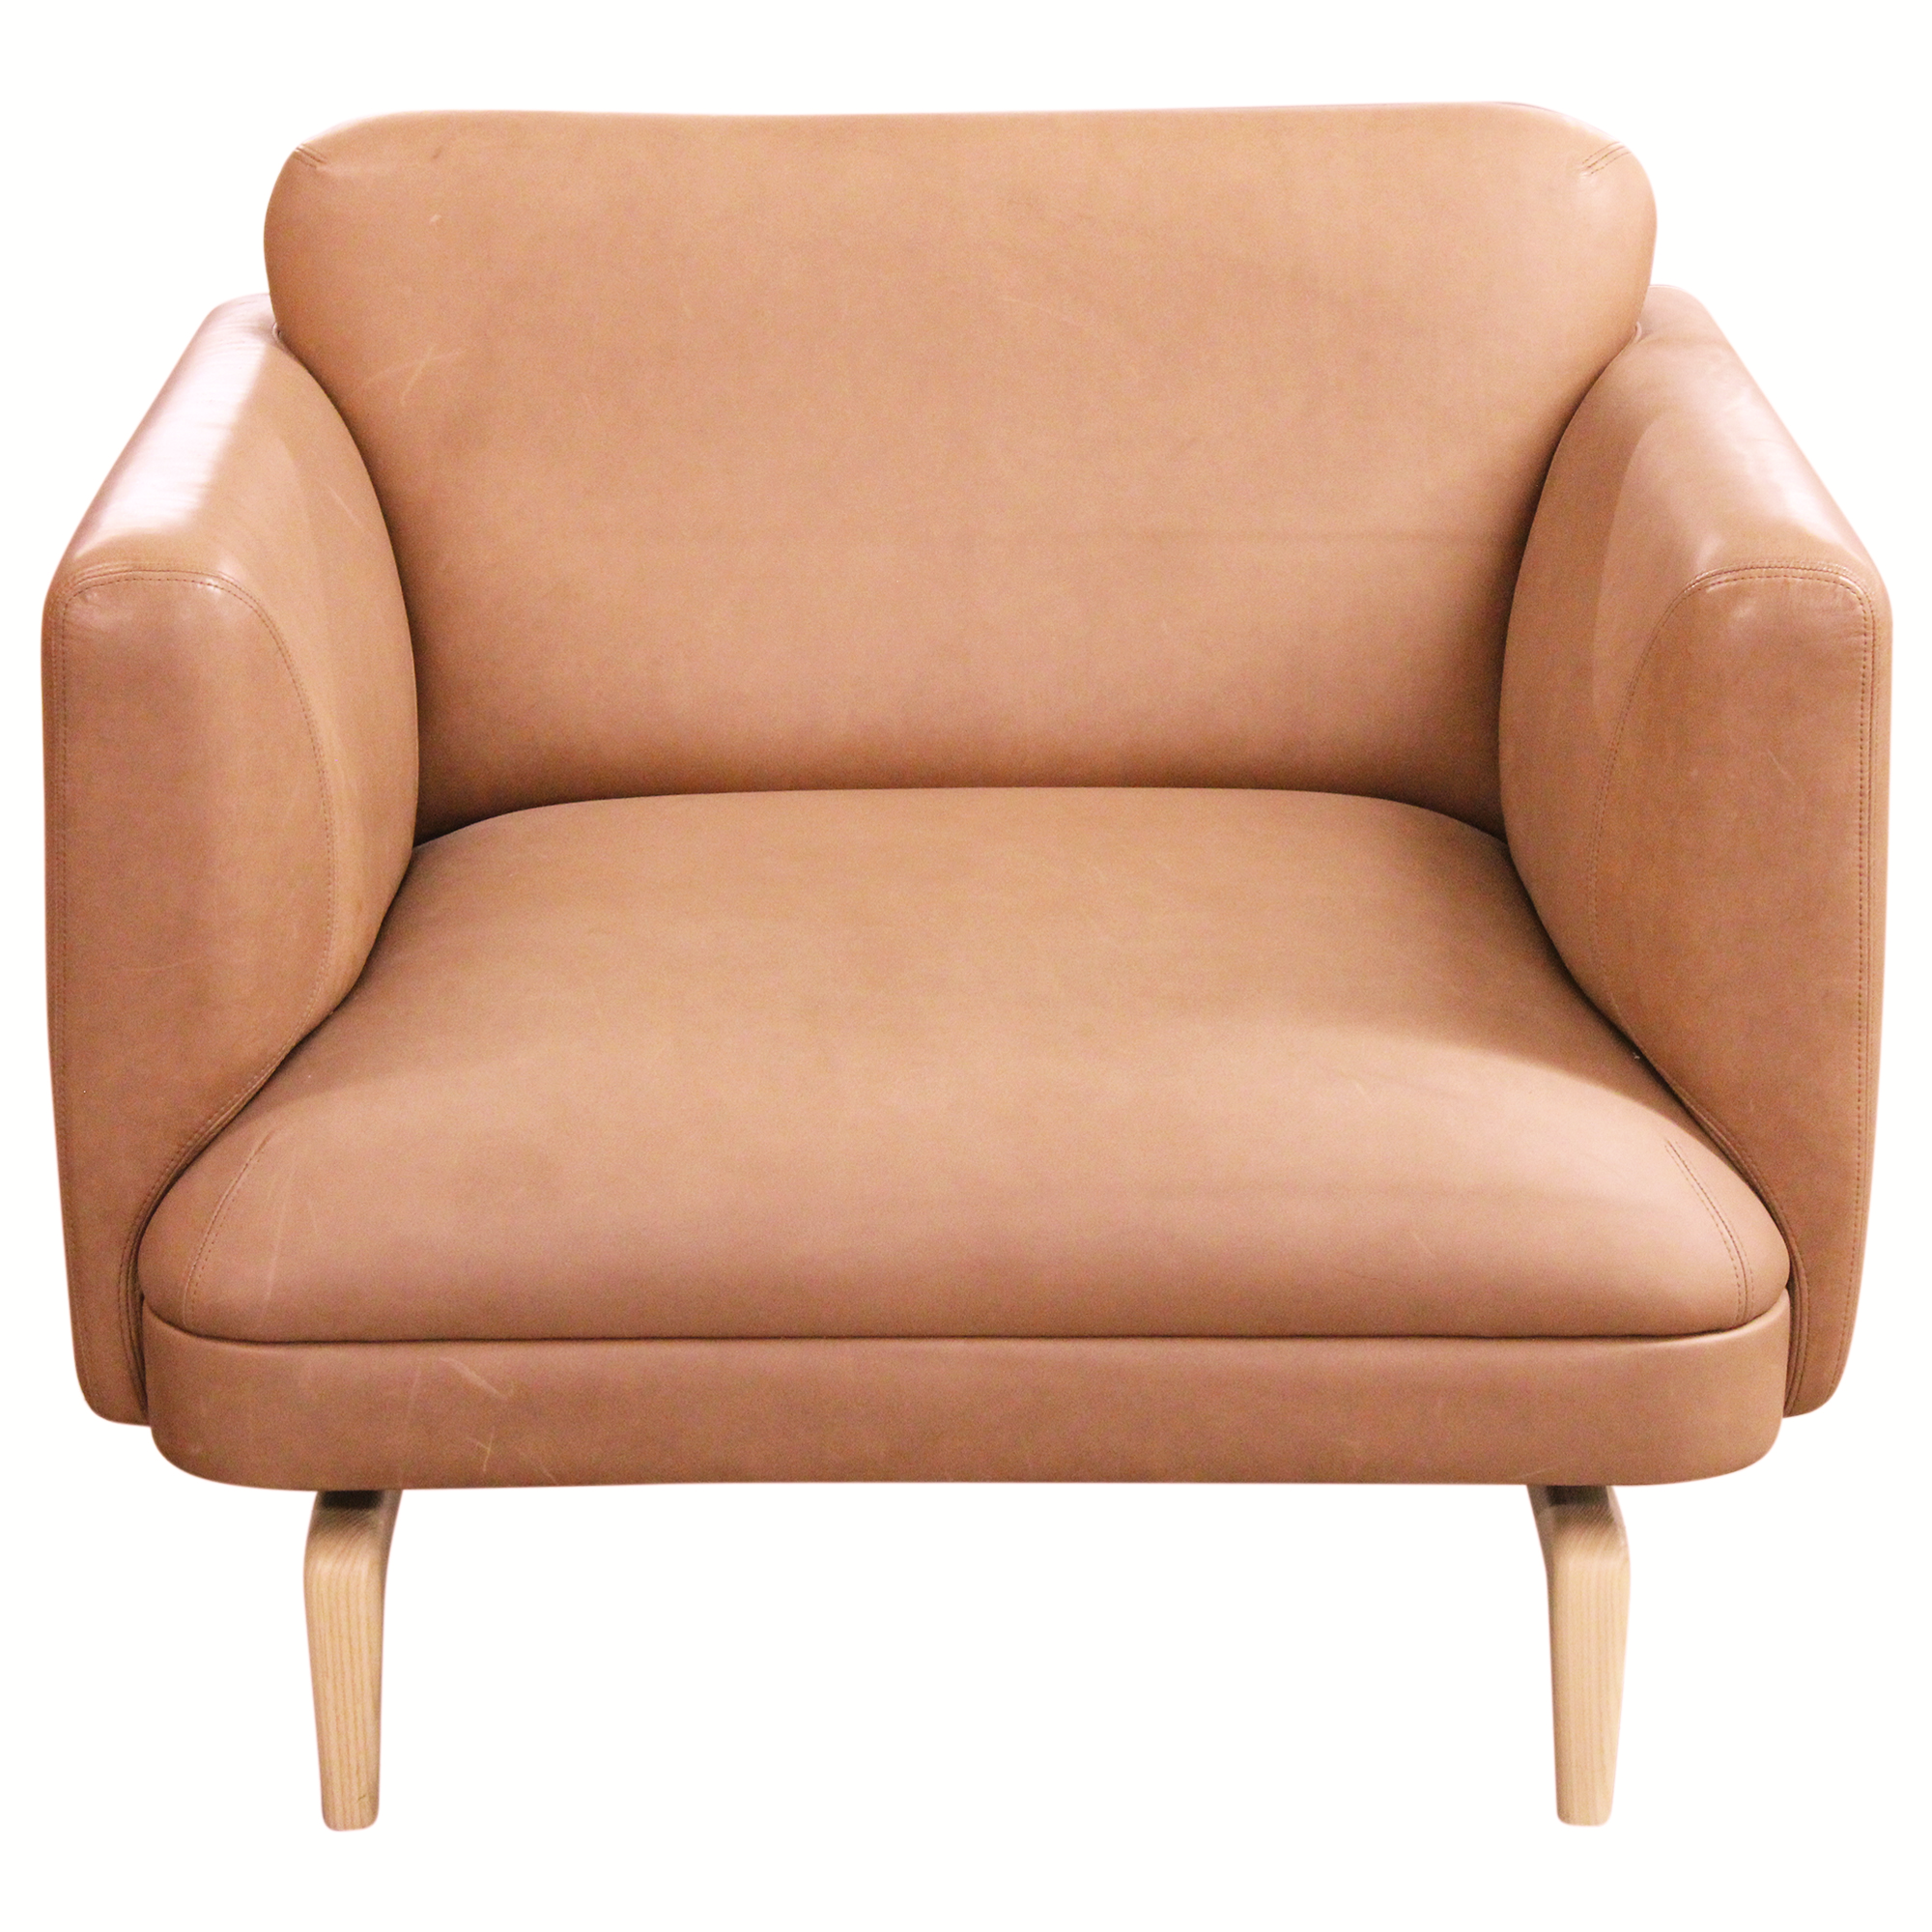 OFS Cosima Lounge Chair, Camel - Preowned